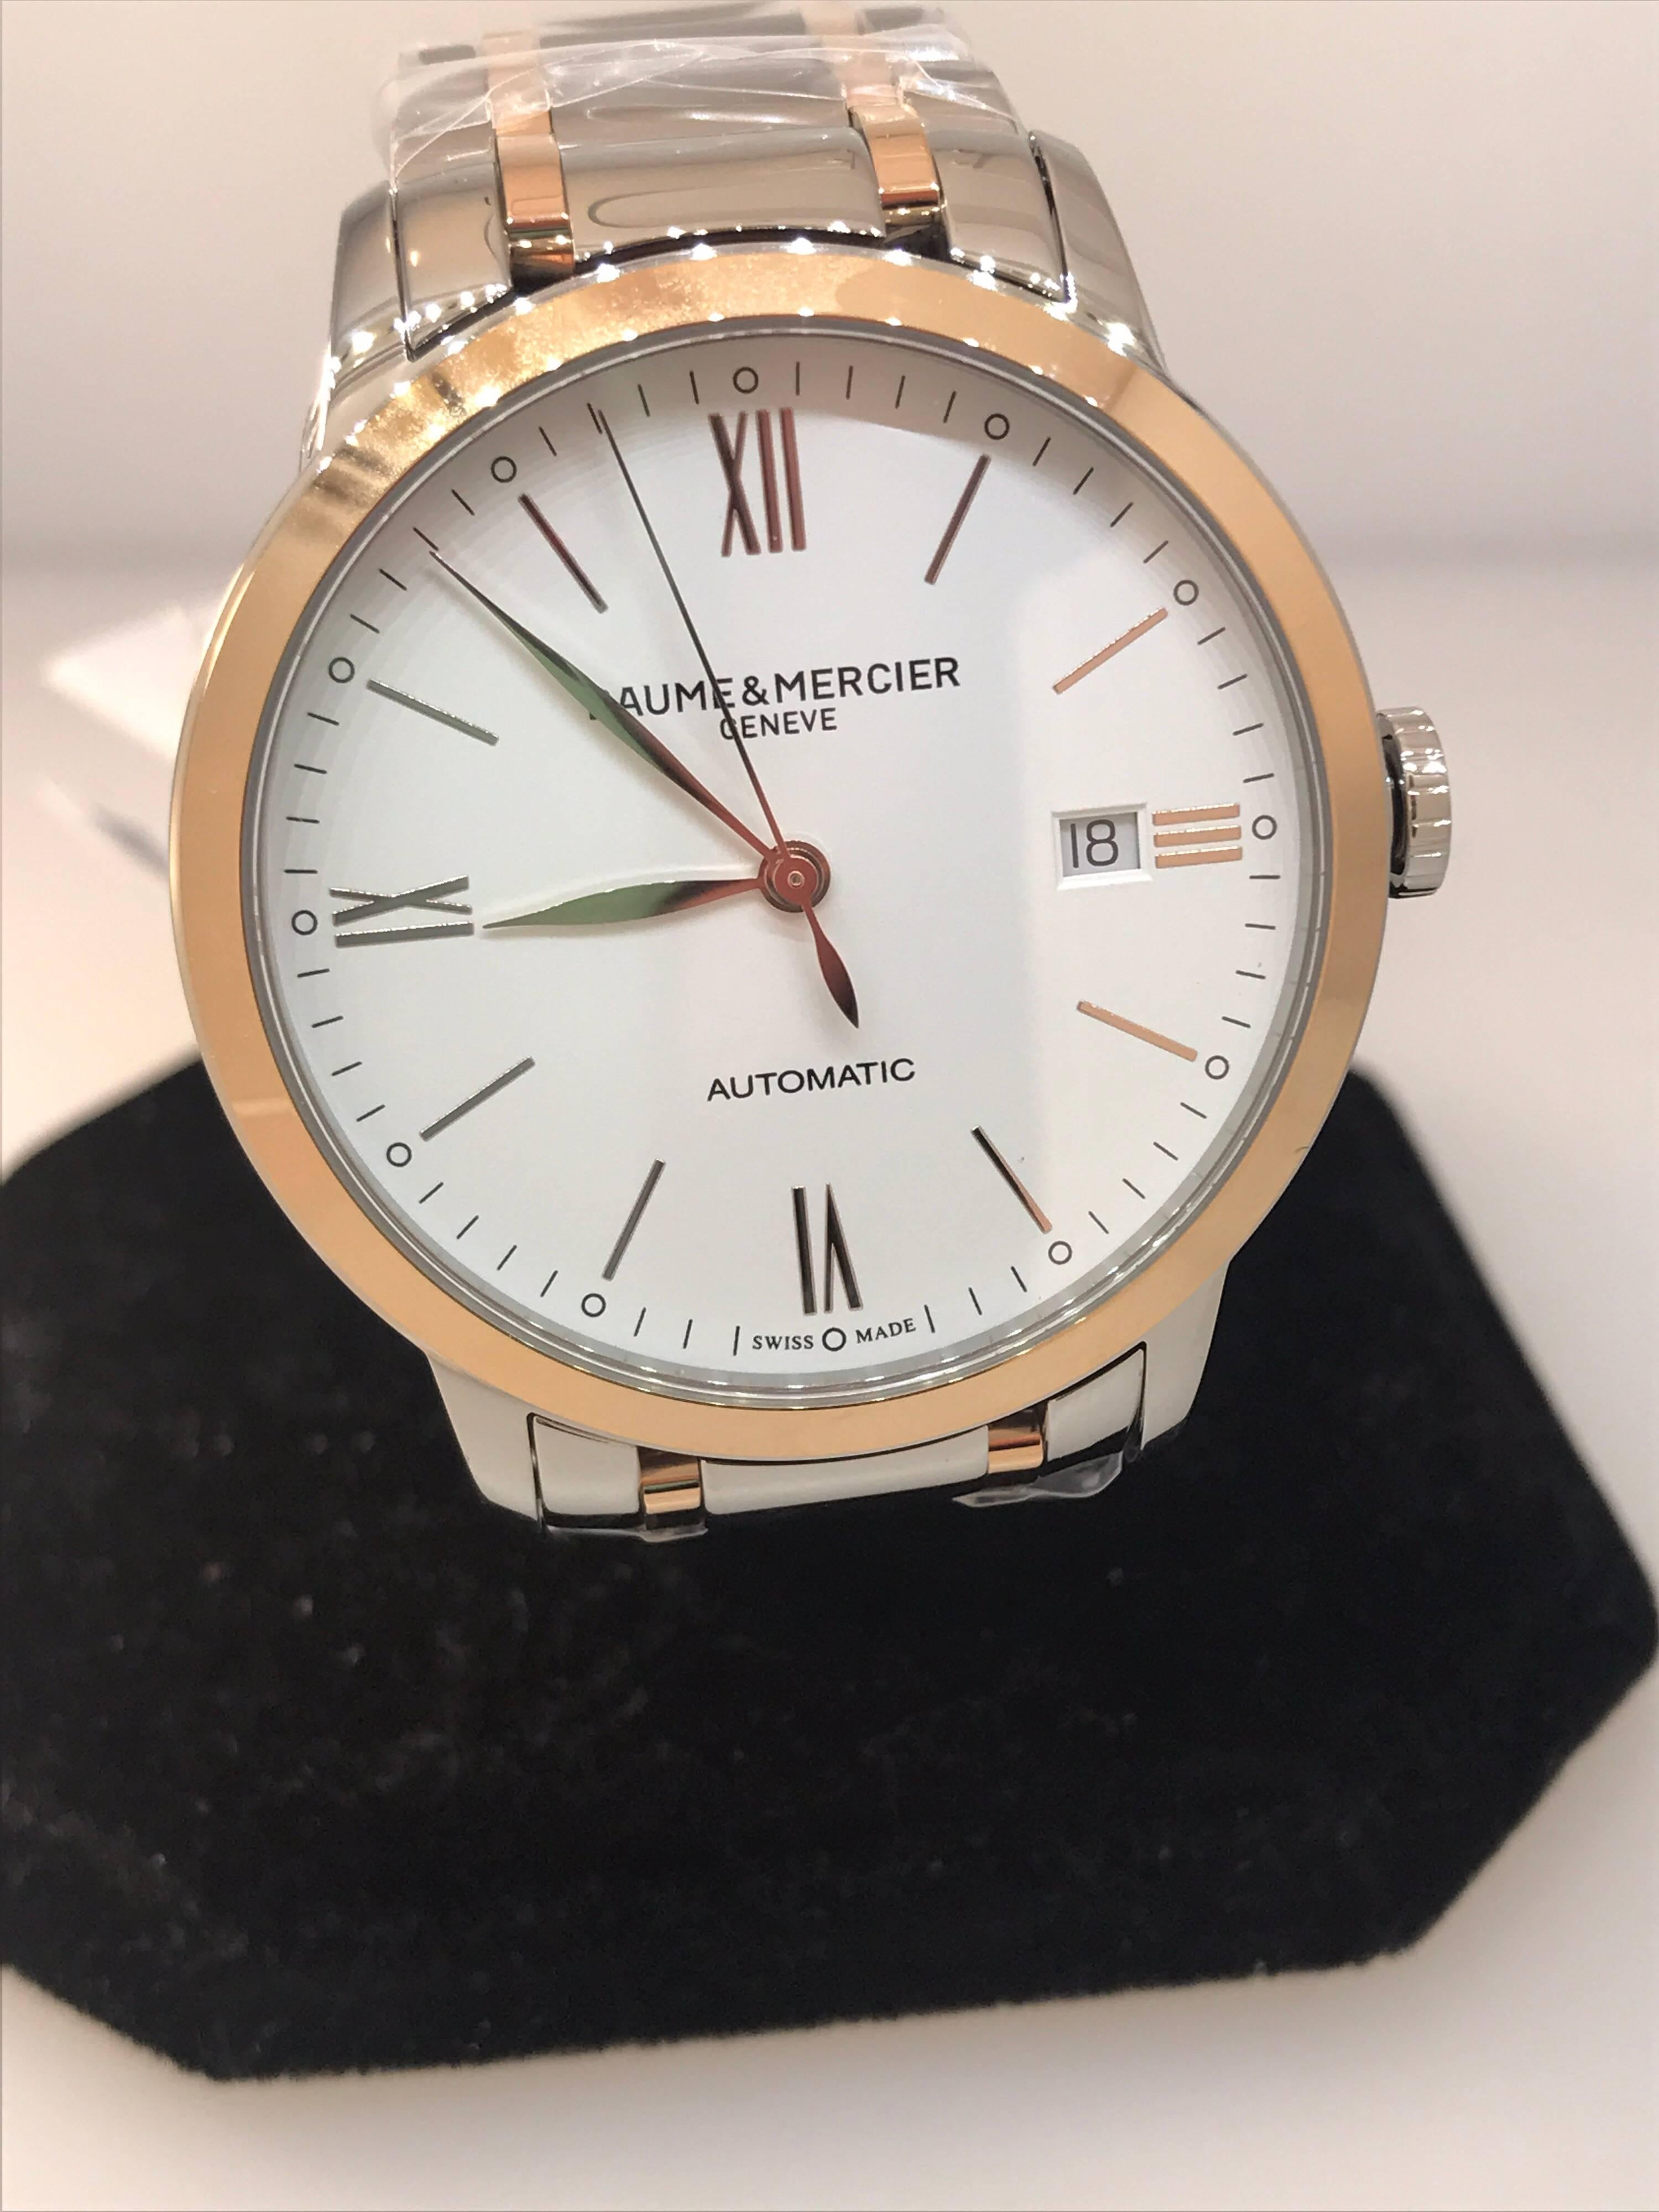 Baume & Mercier Classima Mens Watch

Model Number: M0A10314

Brand New

Comes with original Baume & Mercier box, warranty card, and insruction manual

18 Karat Rose Gold & Stainless Steel Case & Bracelet

White Dial

Rose Gold Tone Roman Numeral &